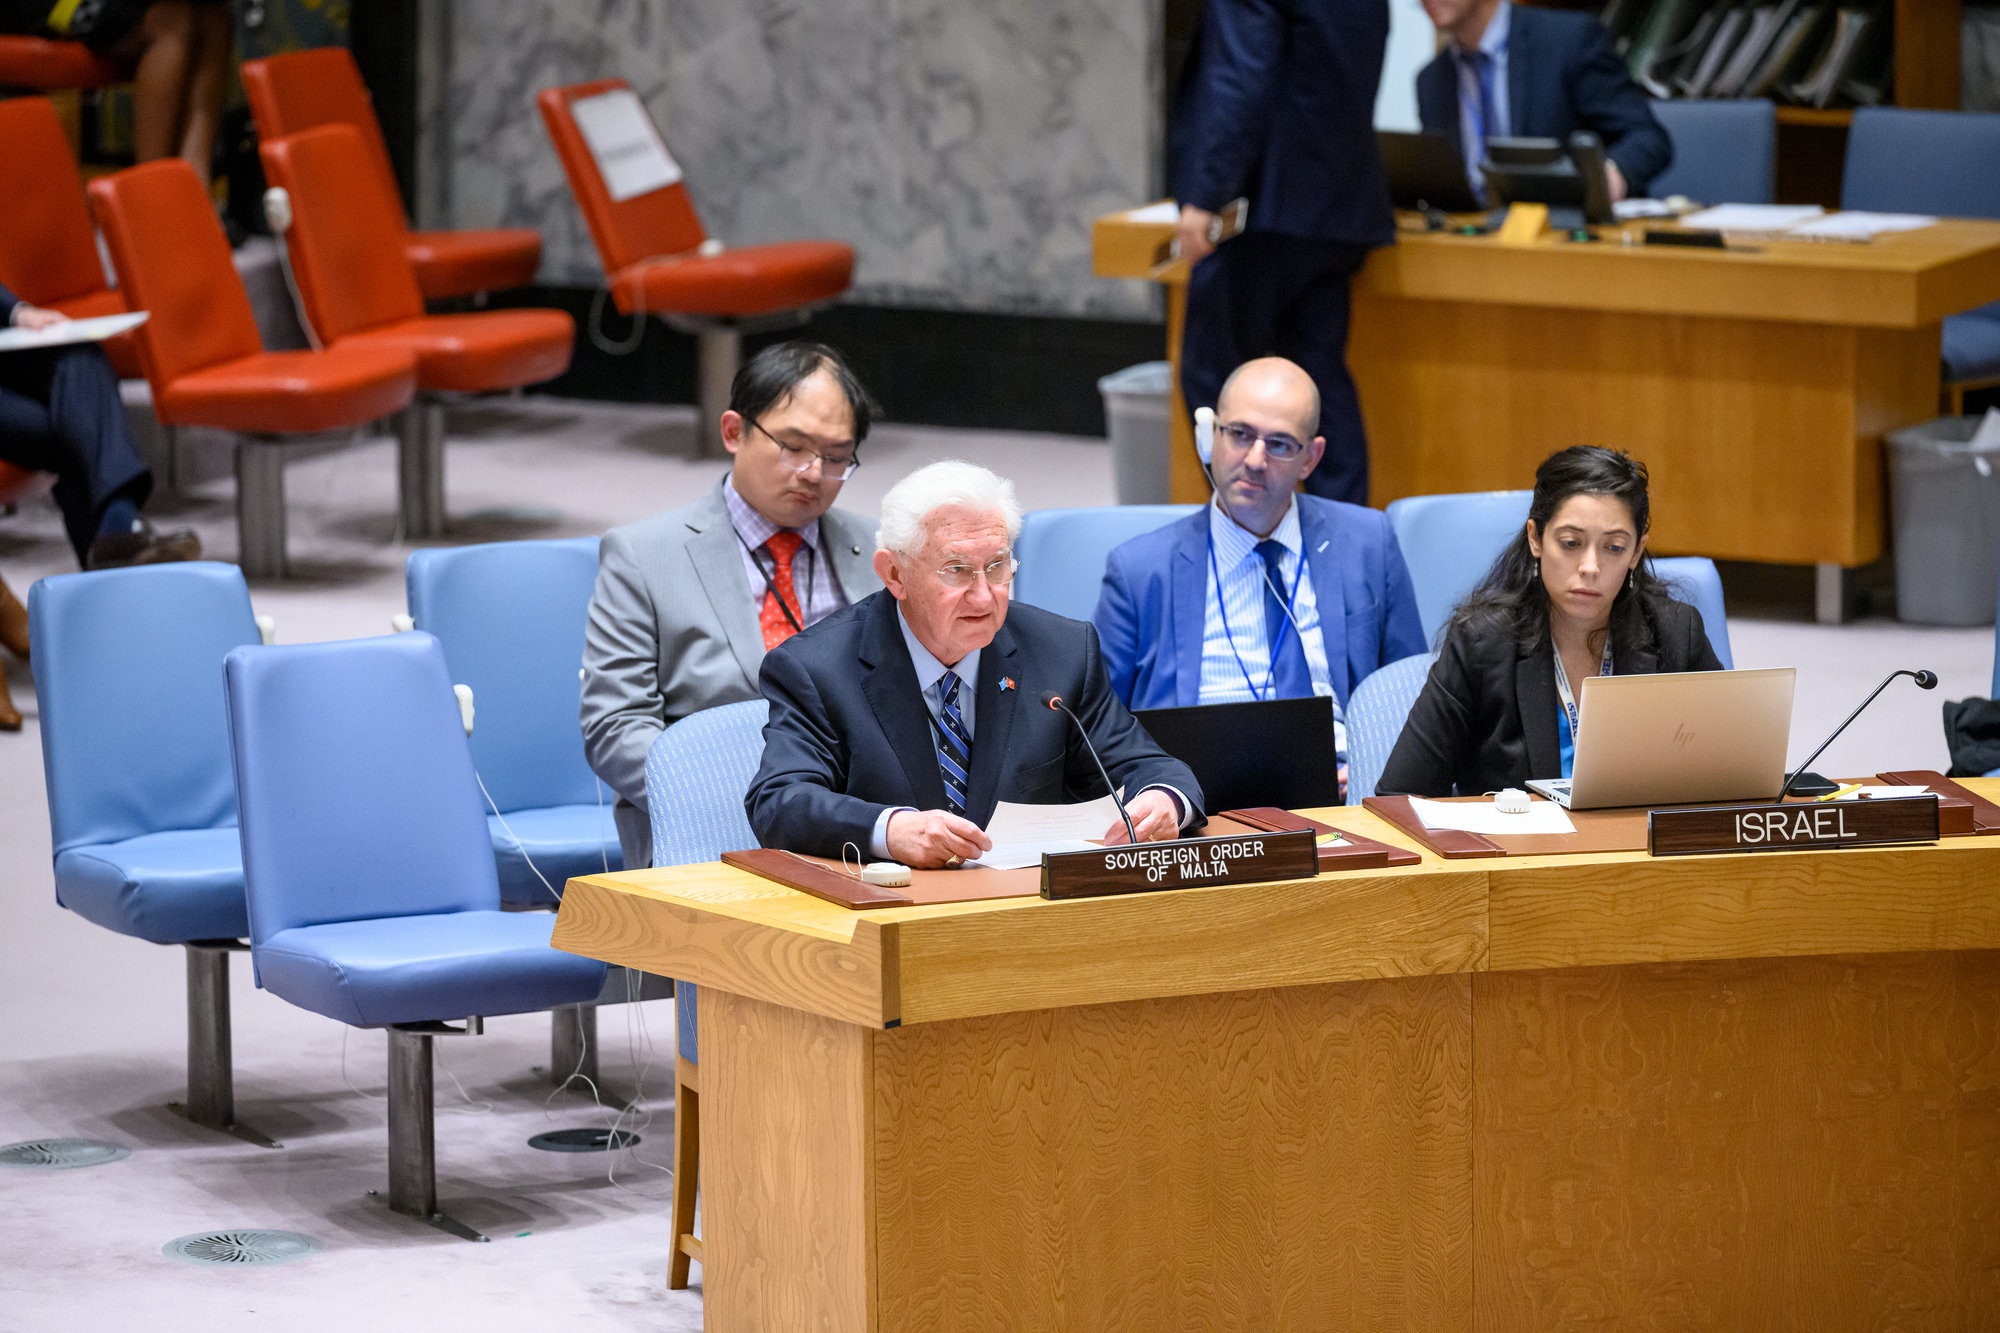 Ambassador Beresford-Hill Addresses the Security Council Regarding the Crisis in the Middle East